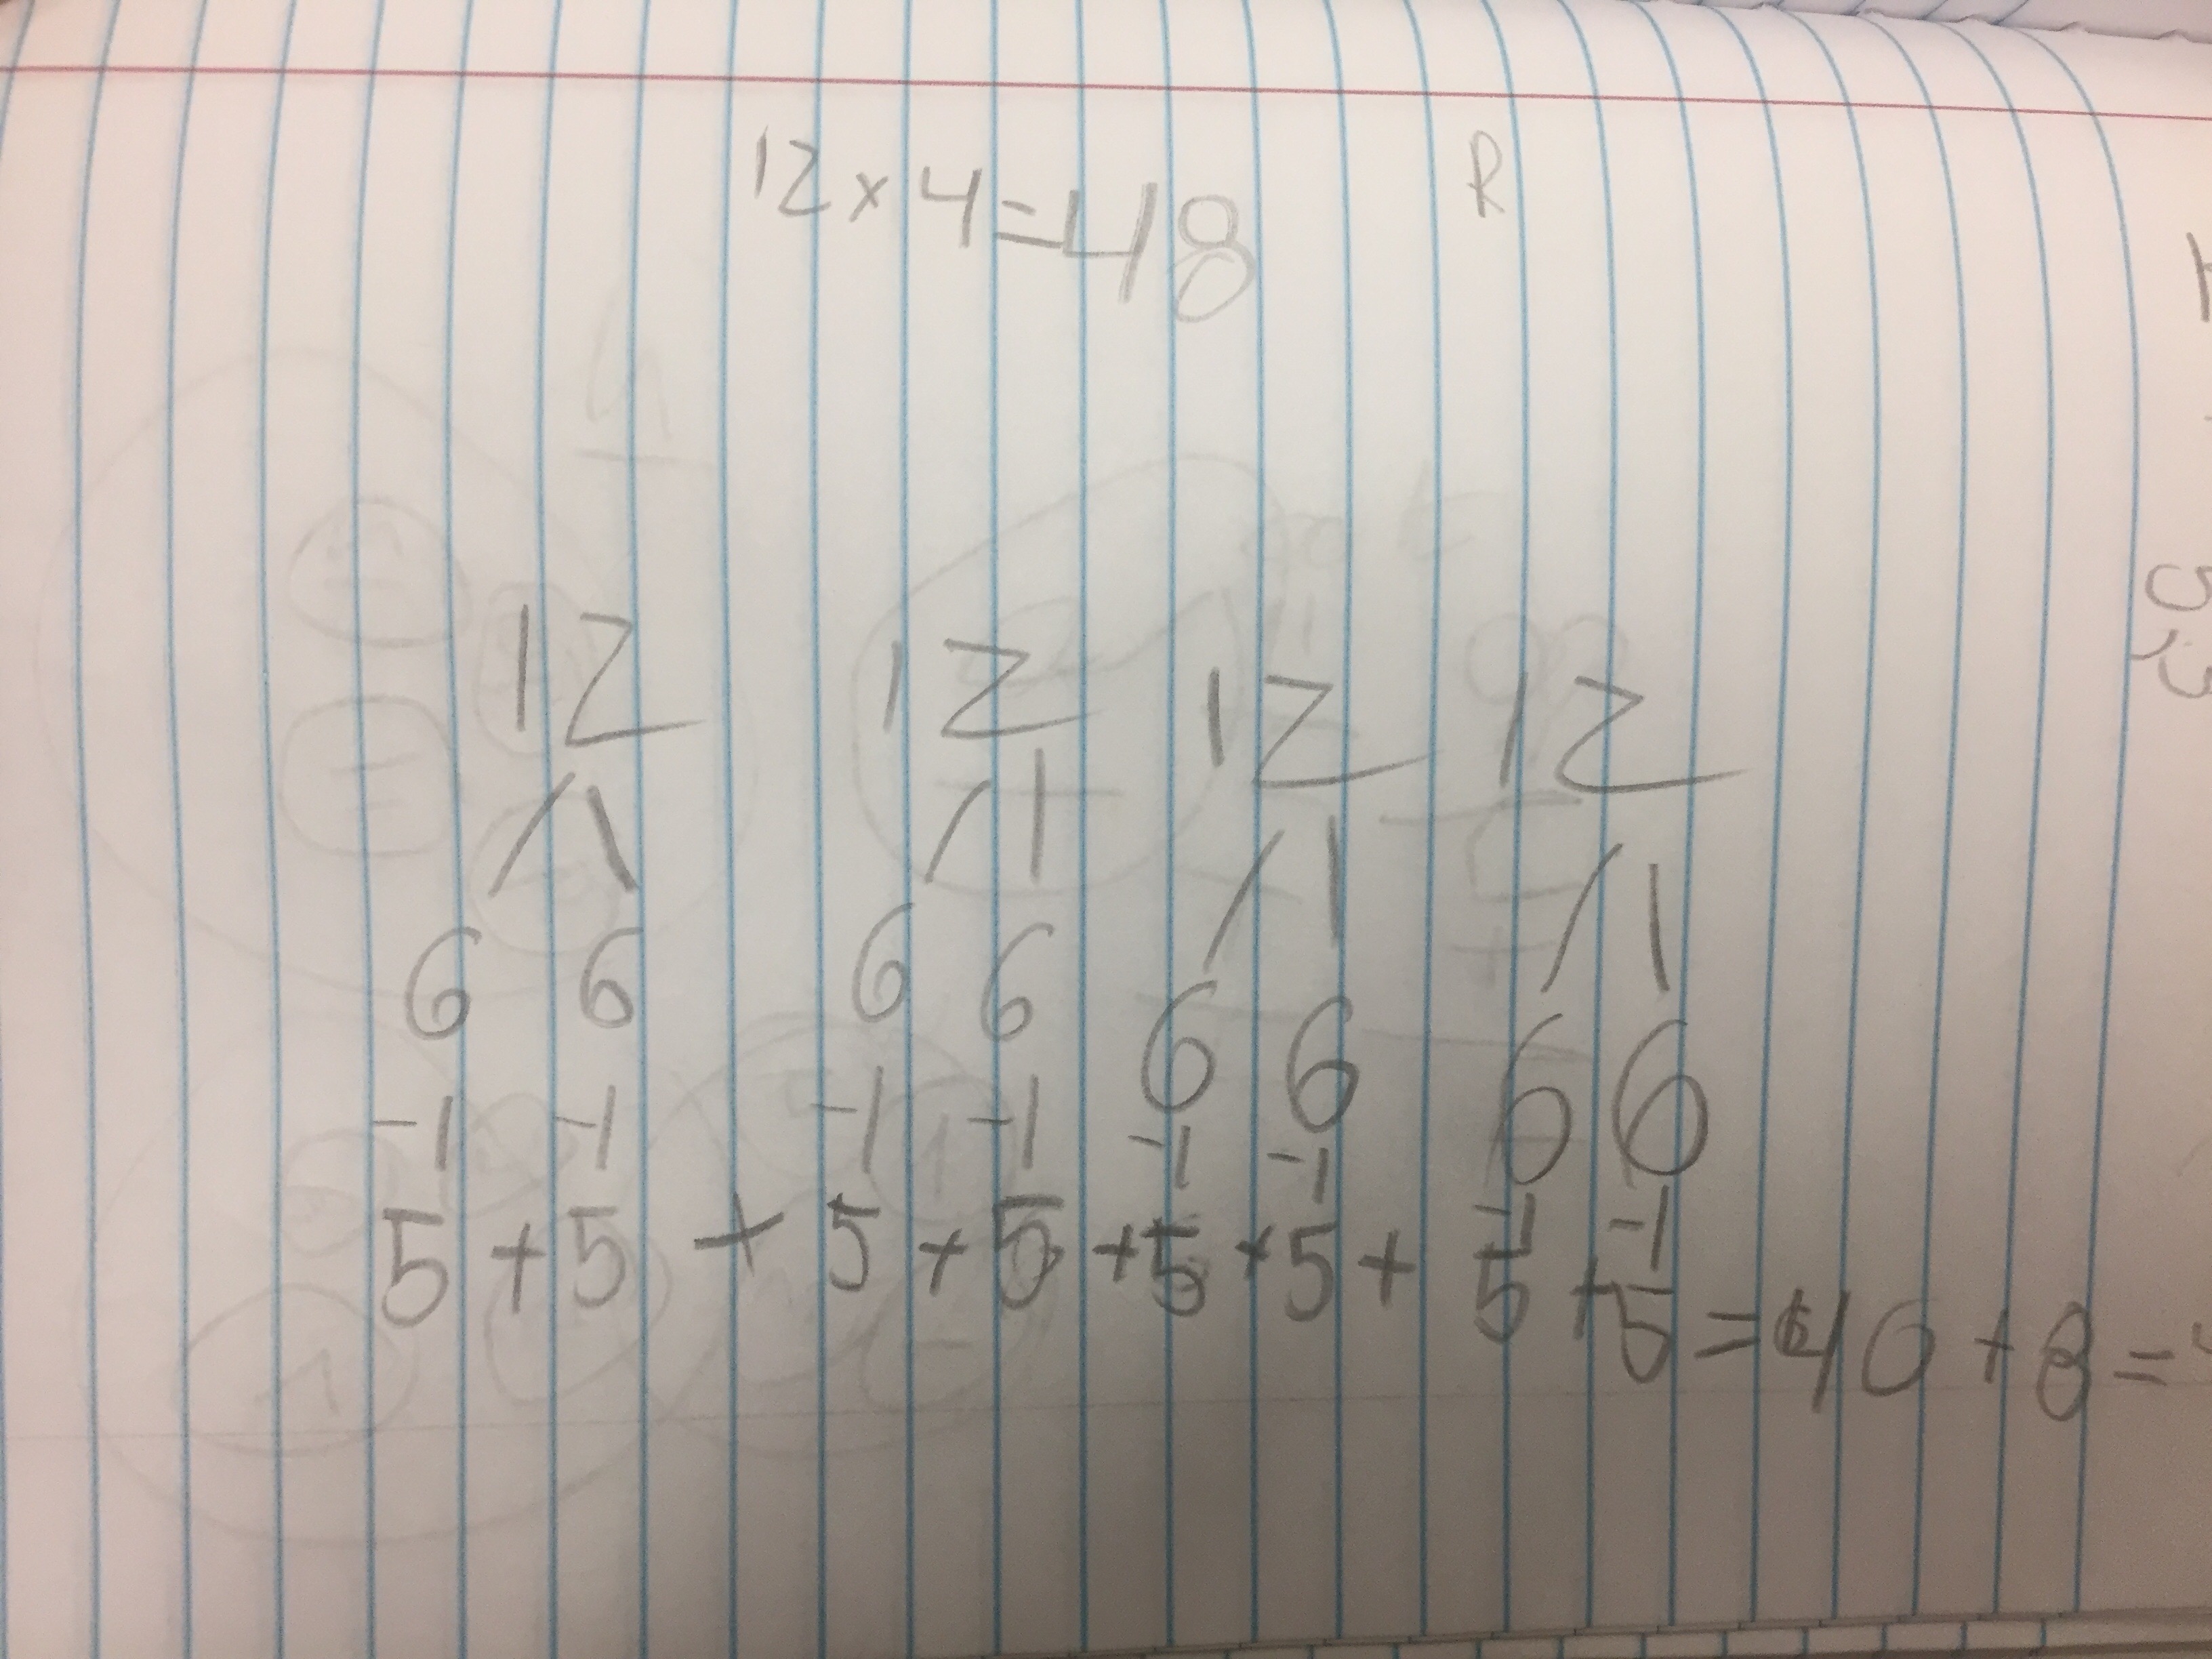 Writing in Math: After a Number String